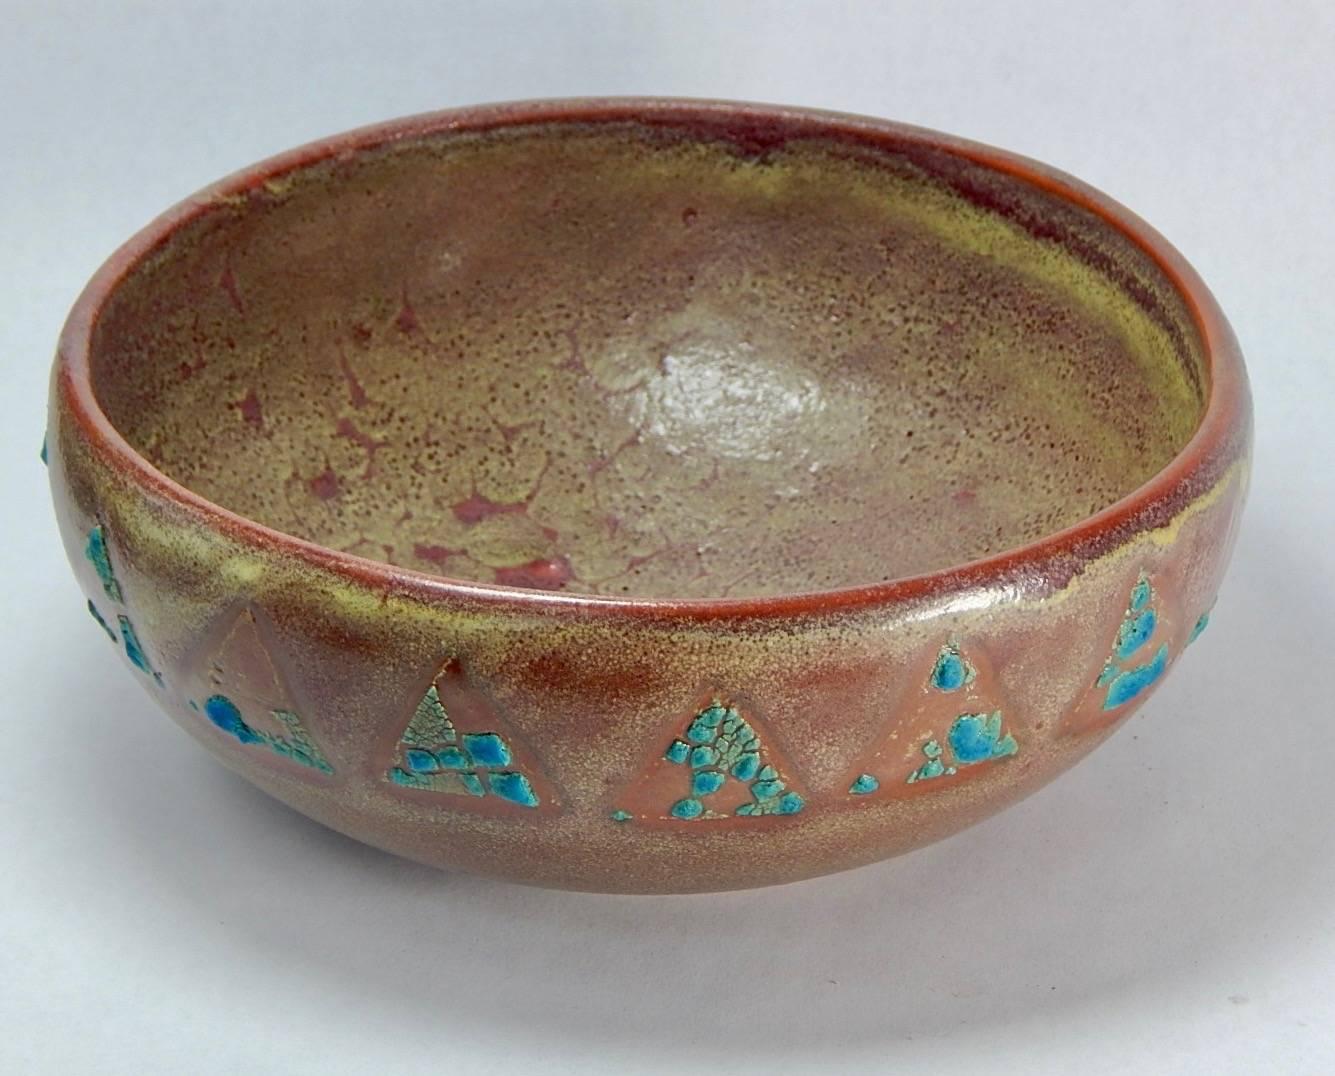 American Relicware Earthenware Bowl # 87 by Andrew Wilder